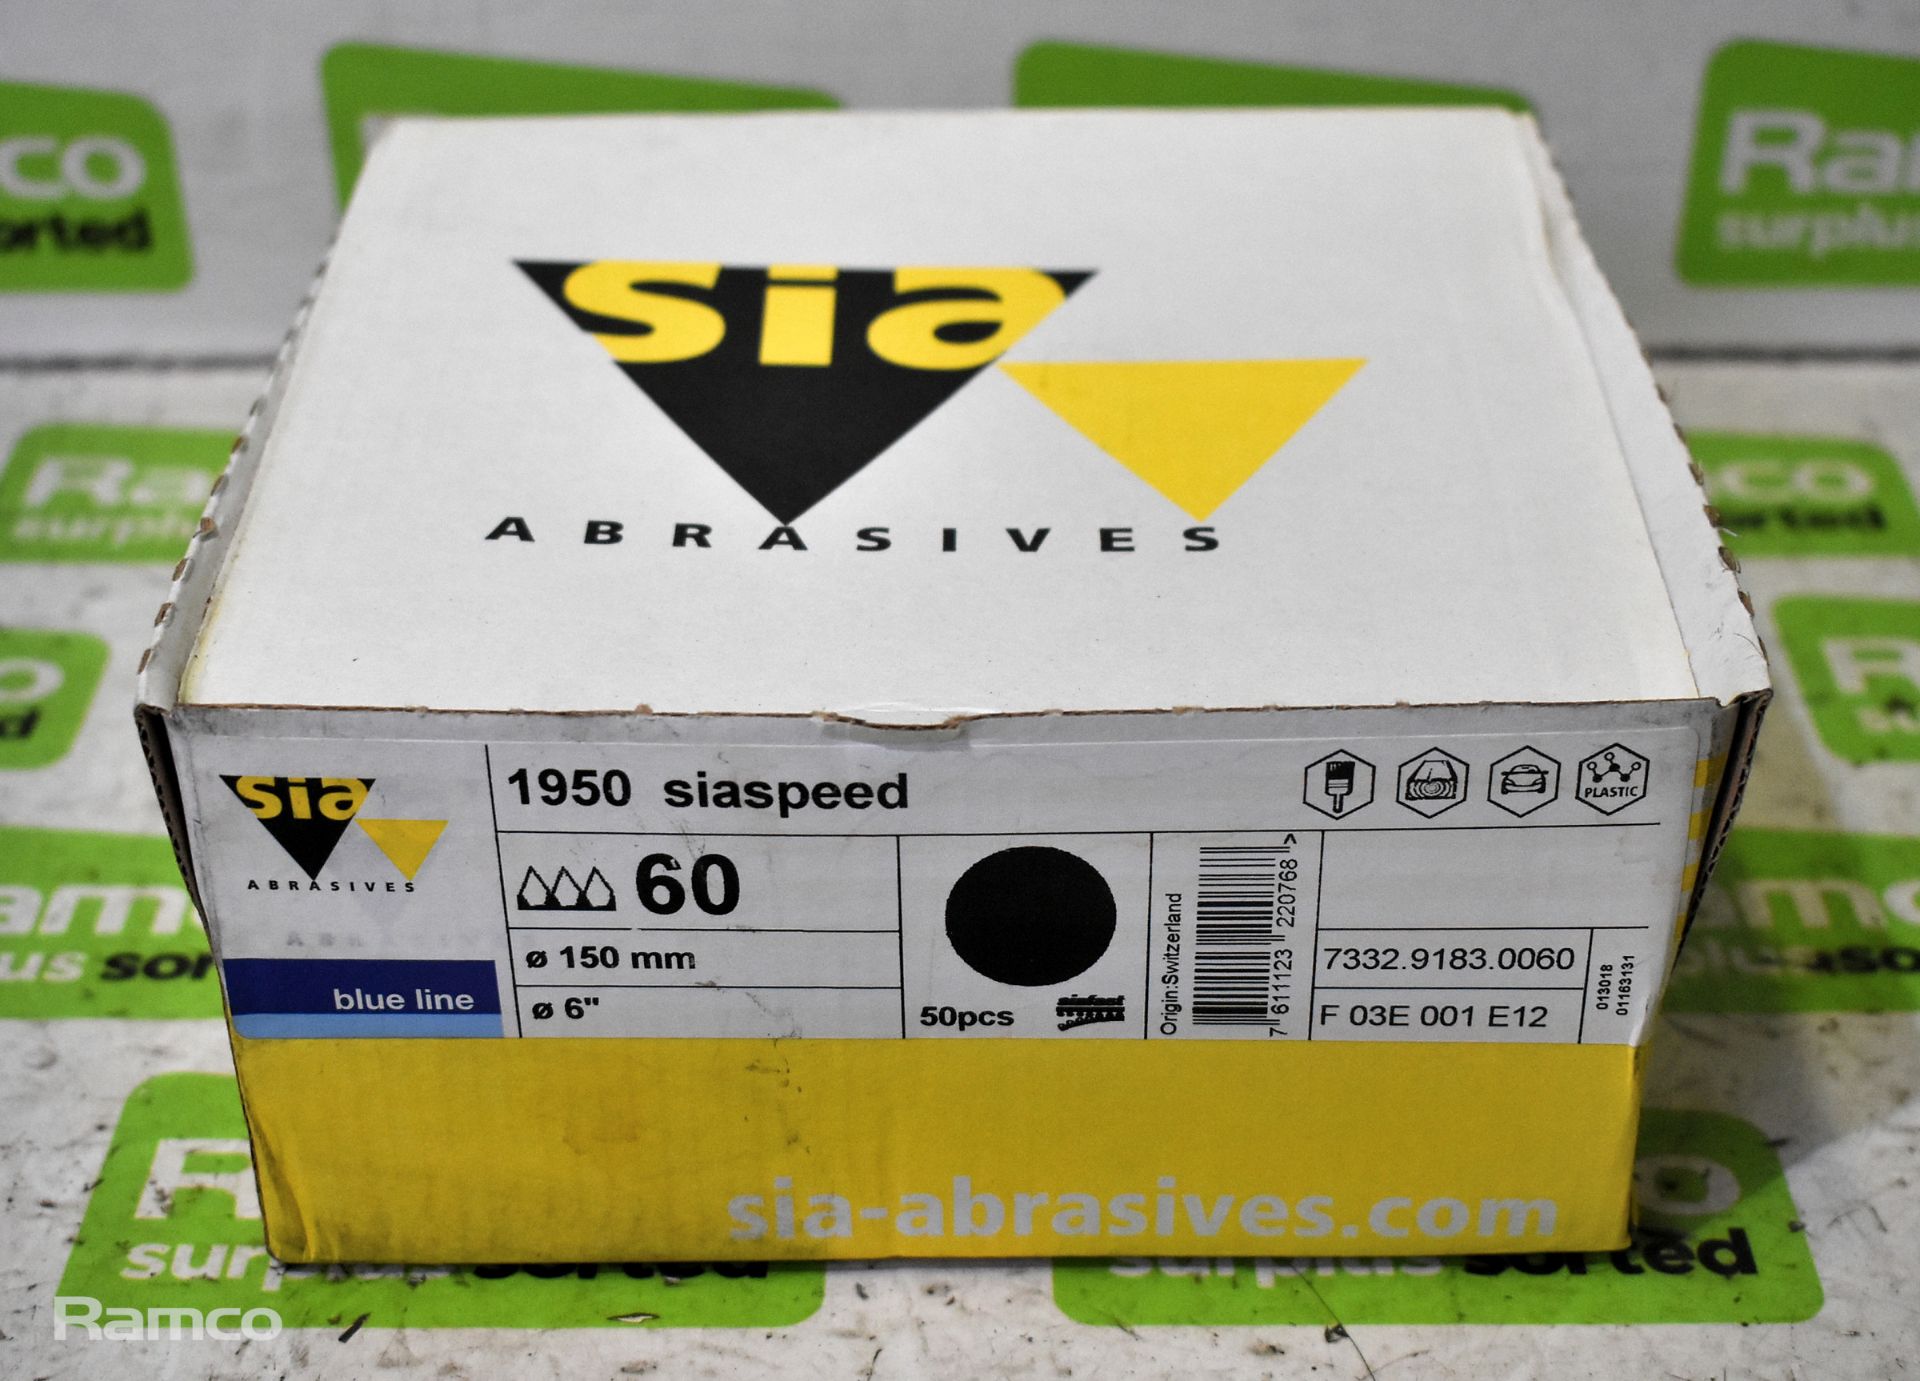 18x boxes of Sia Abrasives 1950 siaspeed 60 grit sanding discs - 150mm - approx 50 discs per box - Image 4 of 5